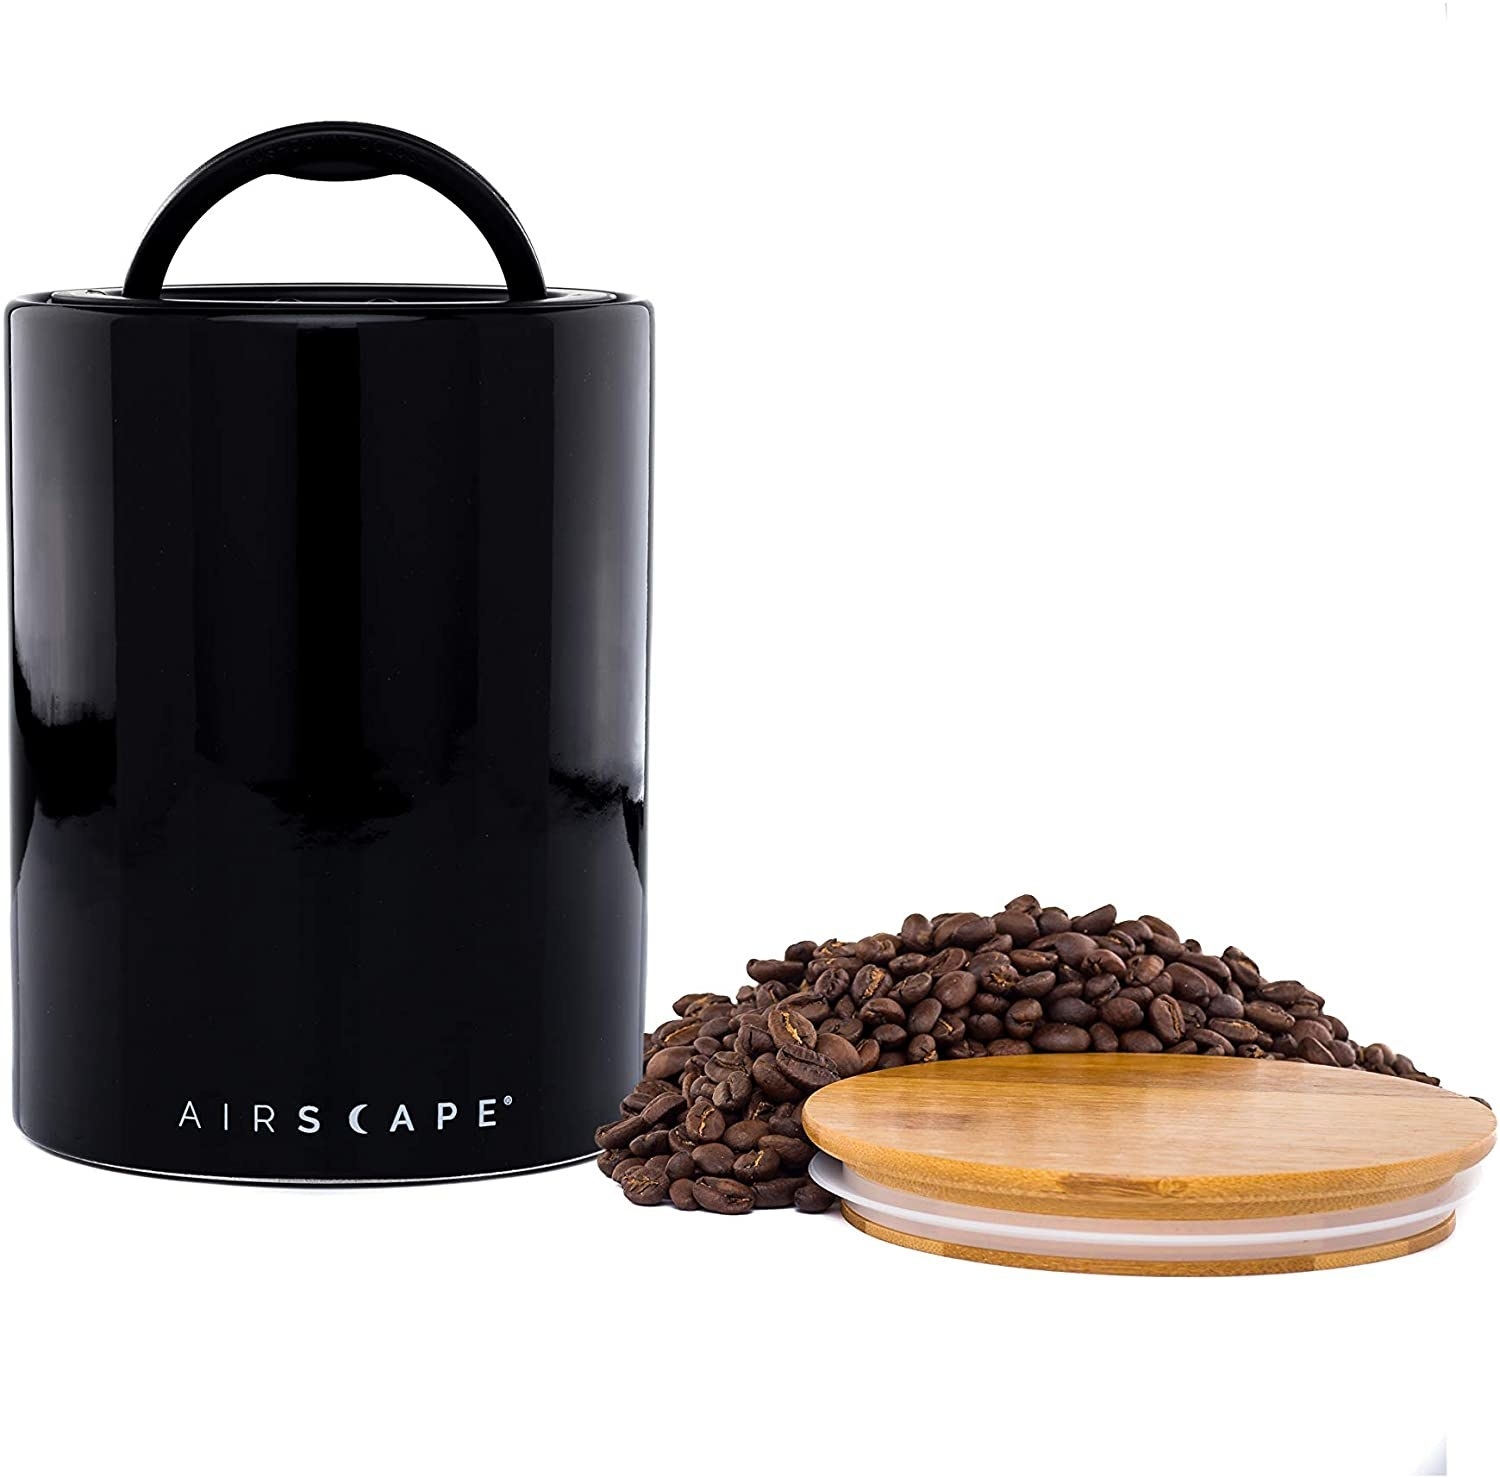 the black Airscape ceramic storage canister